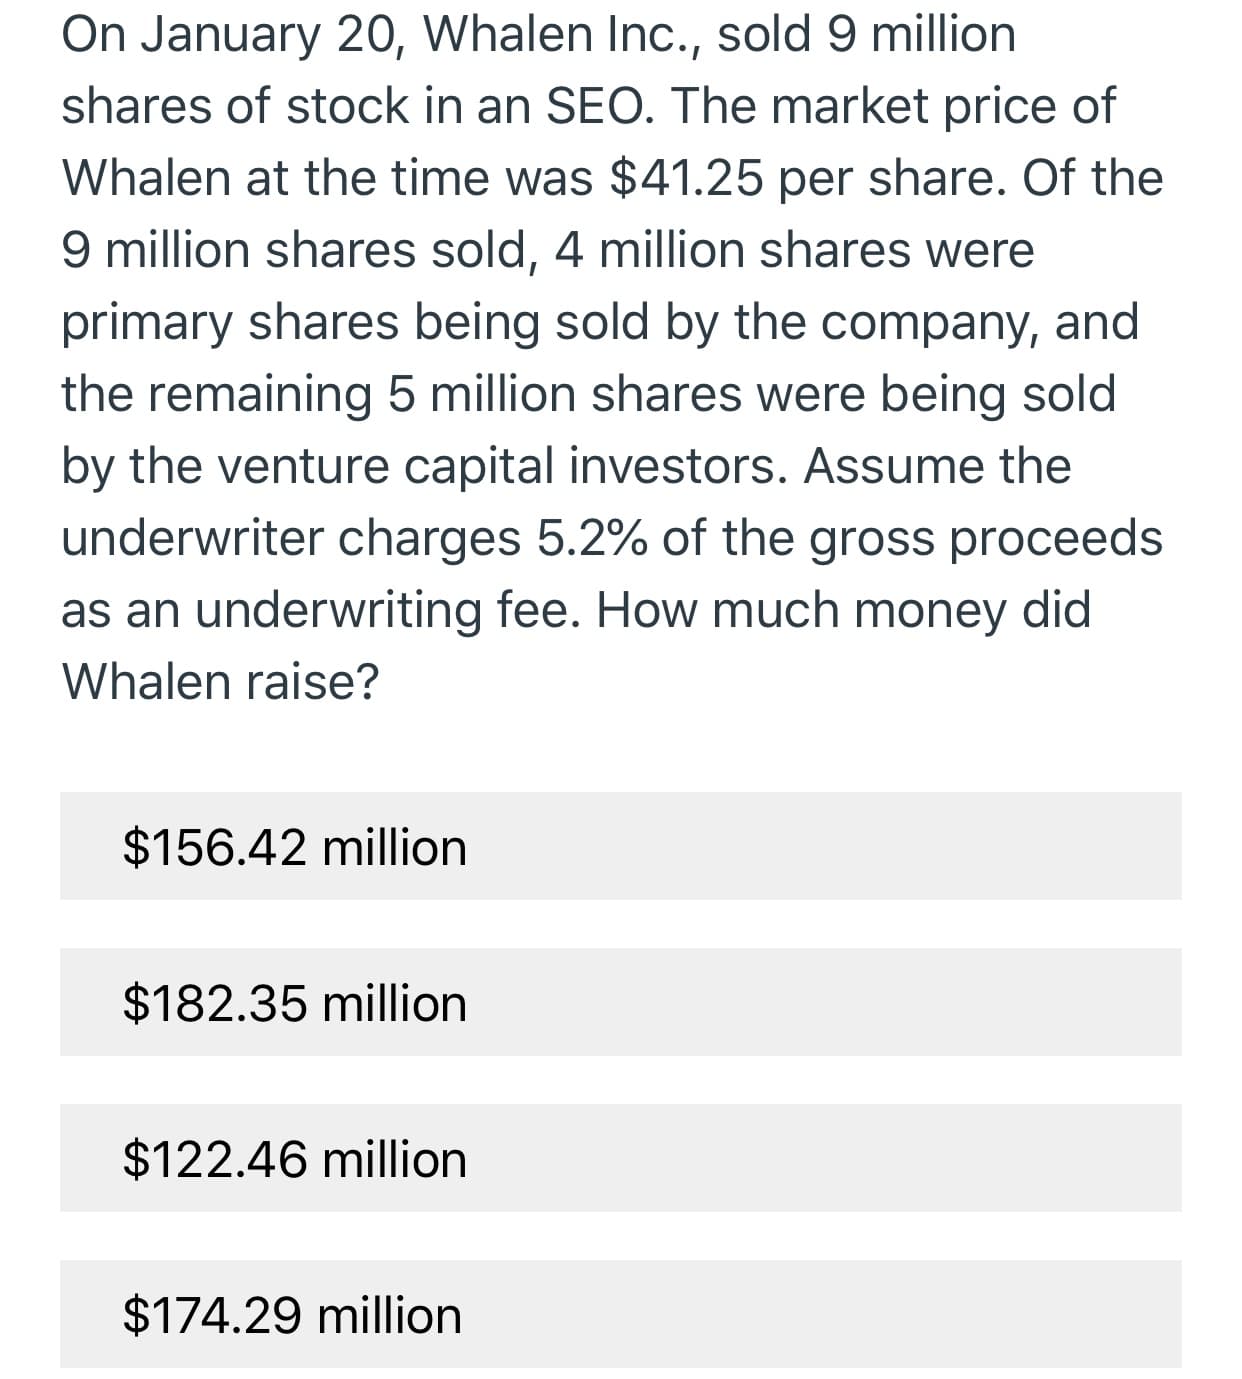 On January 20, Whalen Inc., sold 9 million
shares of stock in an SEO. The market price of
Whalen at the time was $41.25 per share. Of the
9 million shares sold, 4 million shares were
primary shares being sold by the company, and
the remaining 5 million shares were being sold
by the venture capital investors. Assume the
underwriter charges 5.2% of the gross proceeds
as an underwriting fee. How much money did
Whalen raise?
$156.42 million
$182.35 million
$122.46 million
$174.29 million
